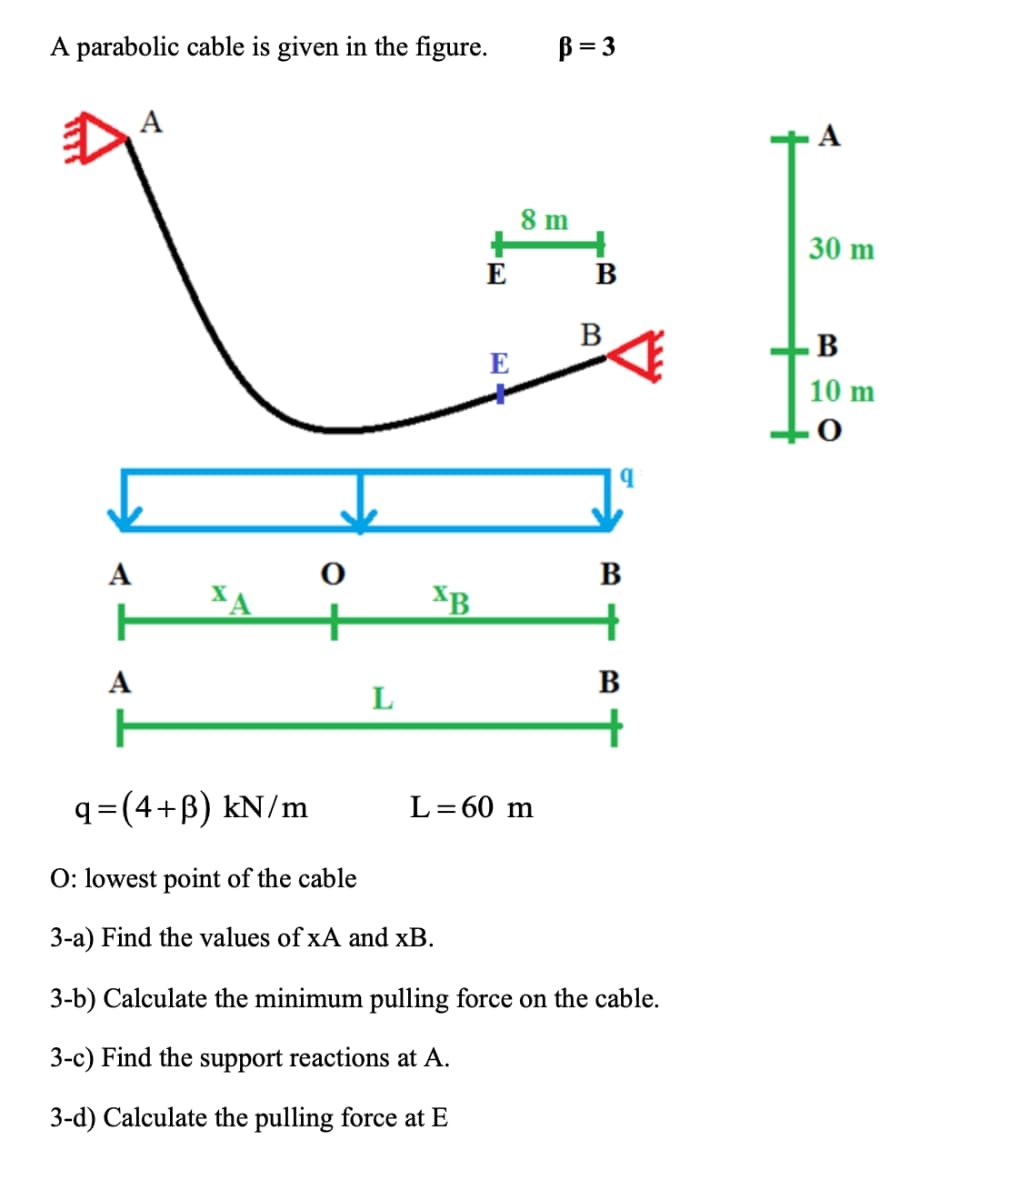 A parabolic cable is given in the figure.
A
B=3
E
E
8 m
B
B
q
30 m
A
H
A
H
ΧΑ
q=(4+B) kN/m
O: lowest point of the cable
L
B
XB
B
L=60 m
3-a) Find the values of xA and xB.
3-b) Calculate the minimum pulling force on the cable.
3-c) Find the support reactions at A.
3-d) Calculate the pulling force at E
10 m
BUO